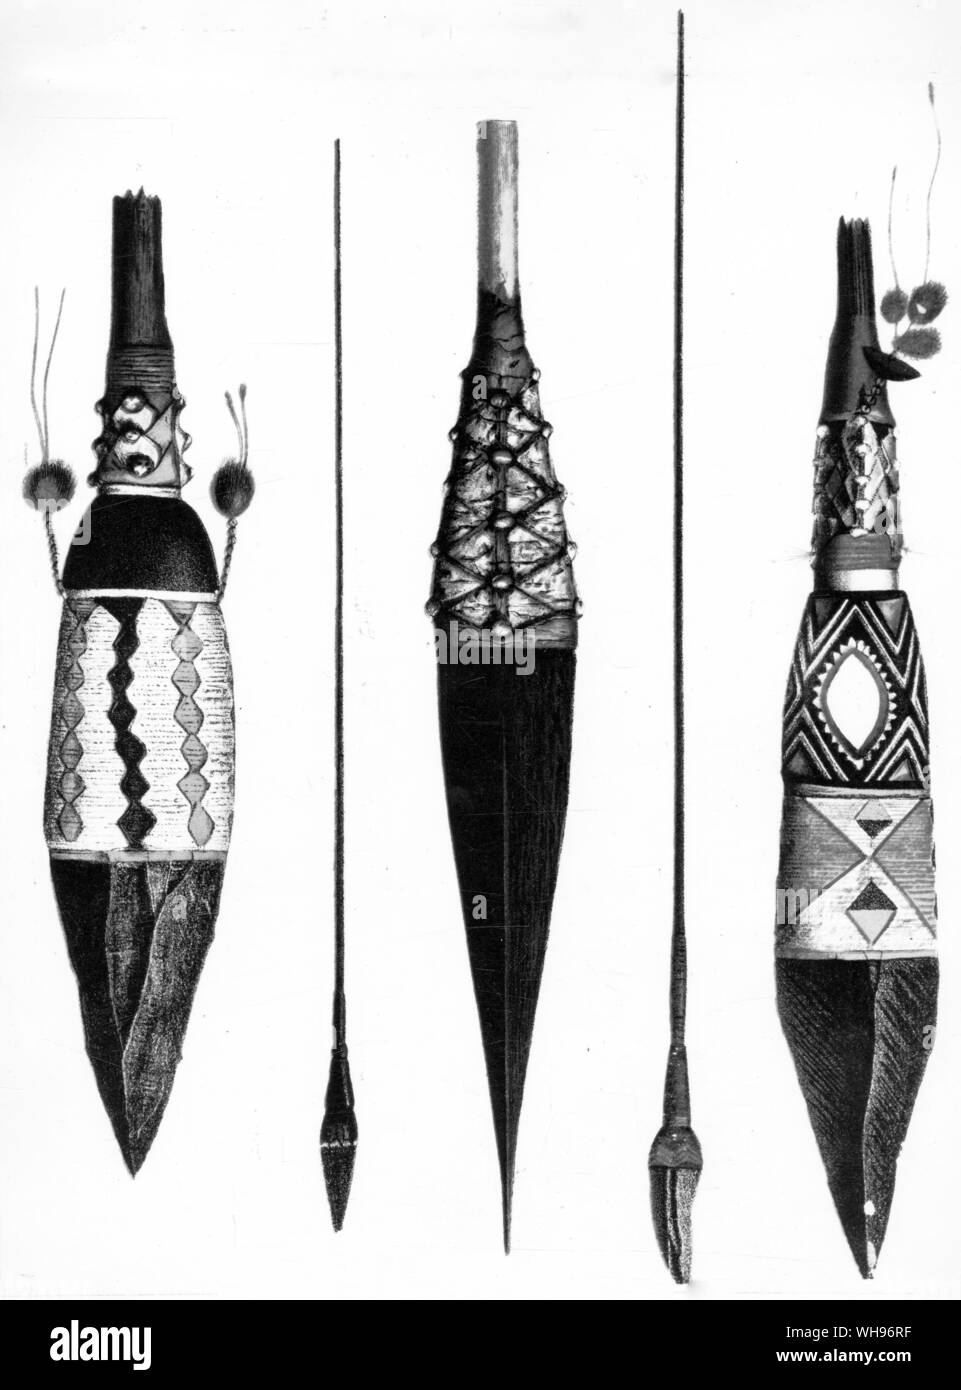 New Guinea: Admiralty Islands. Spears. The central one below has its tip, made of hardwood, painted to look like the obsidian heads to the left and right. Stock Photo